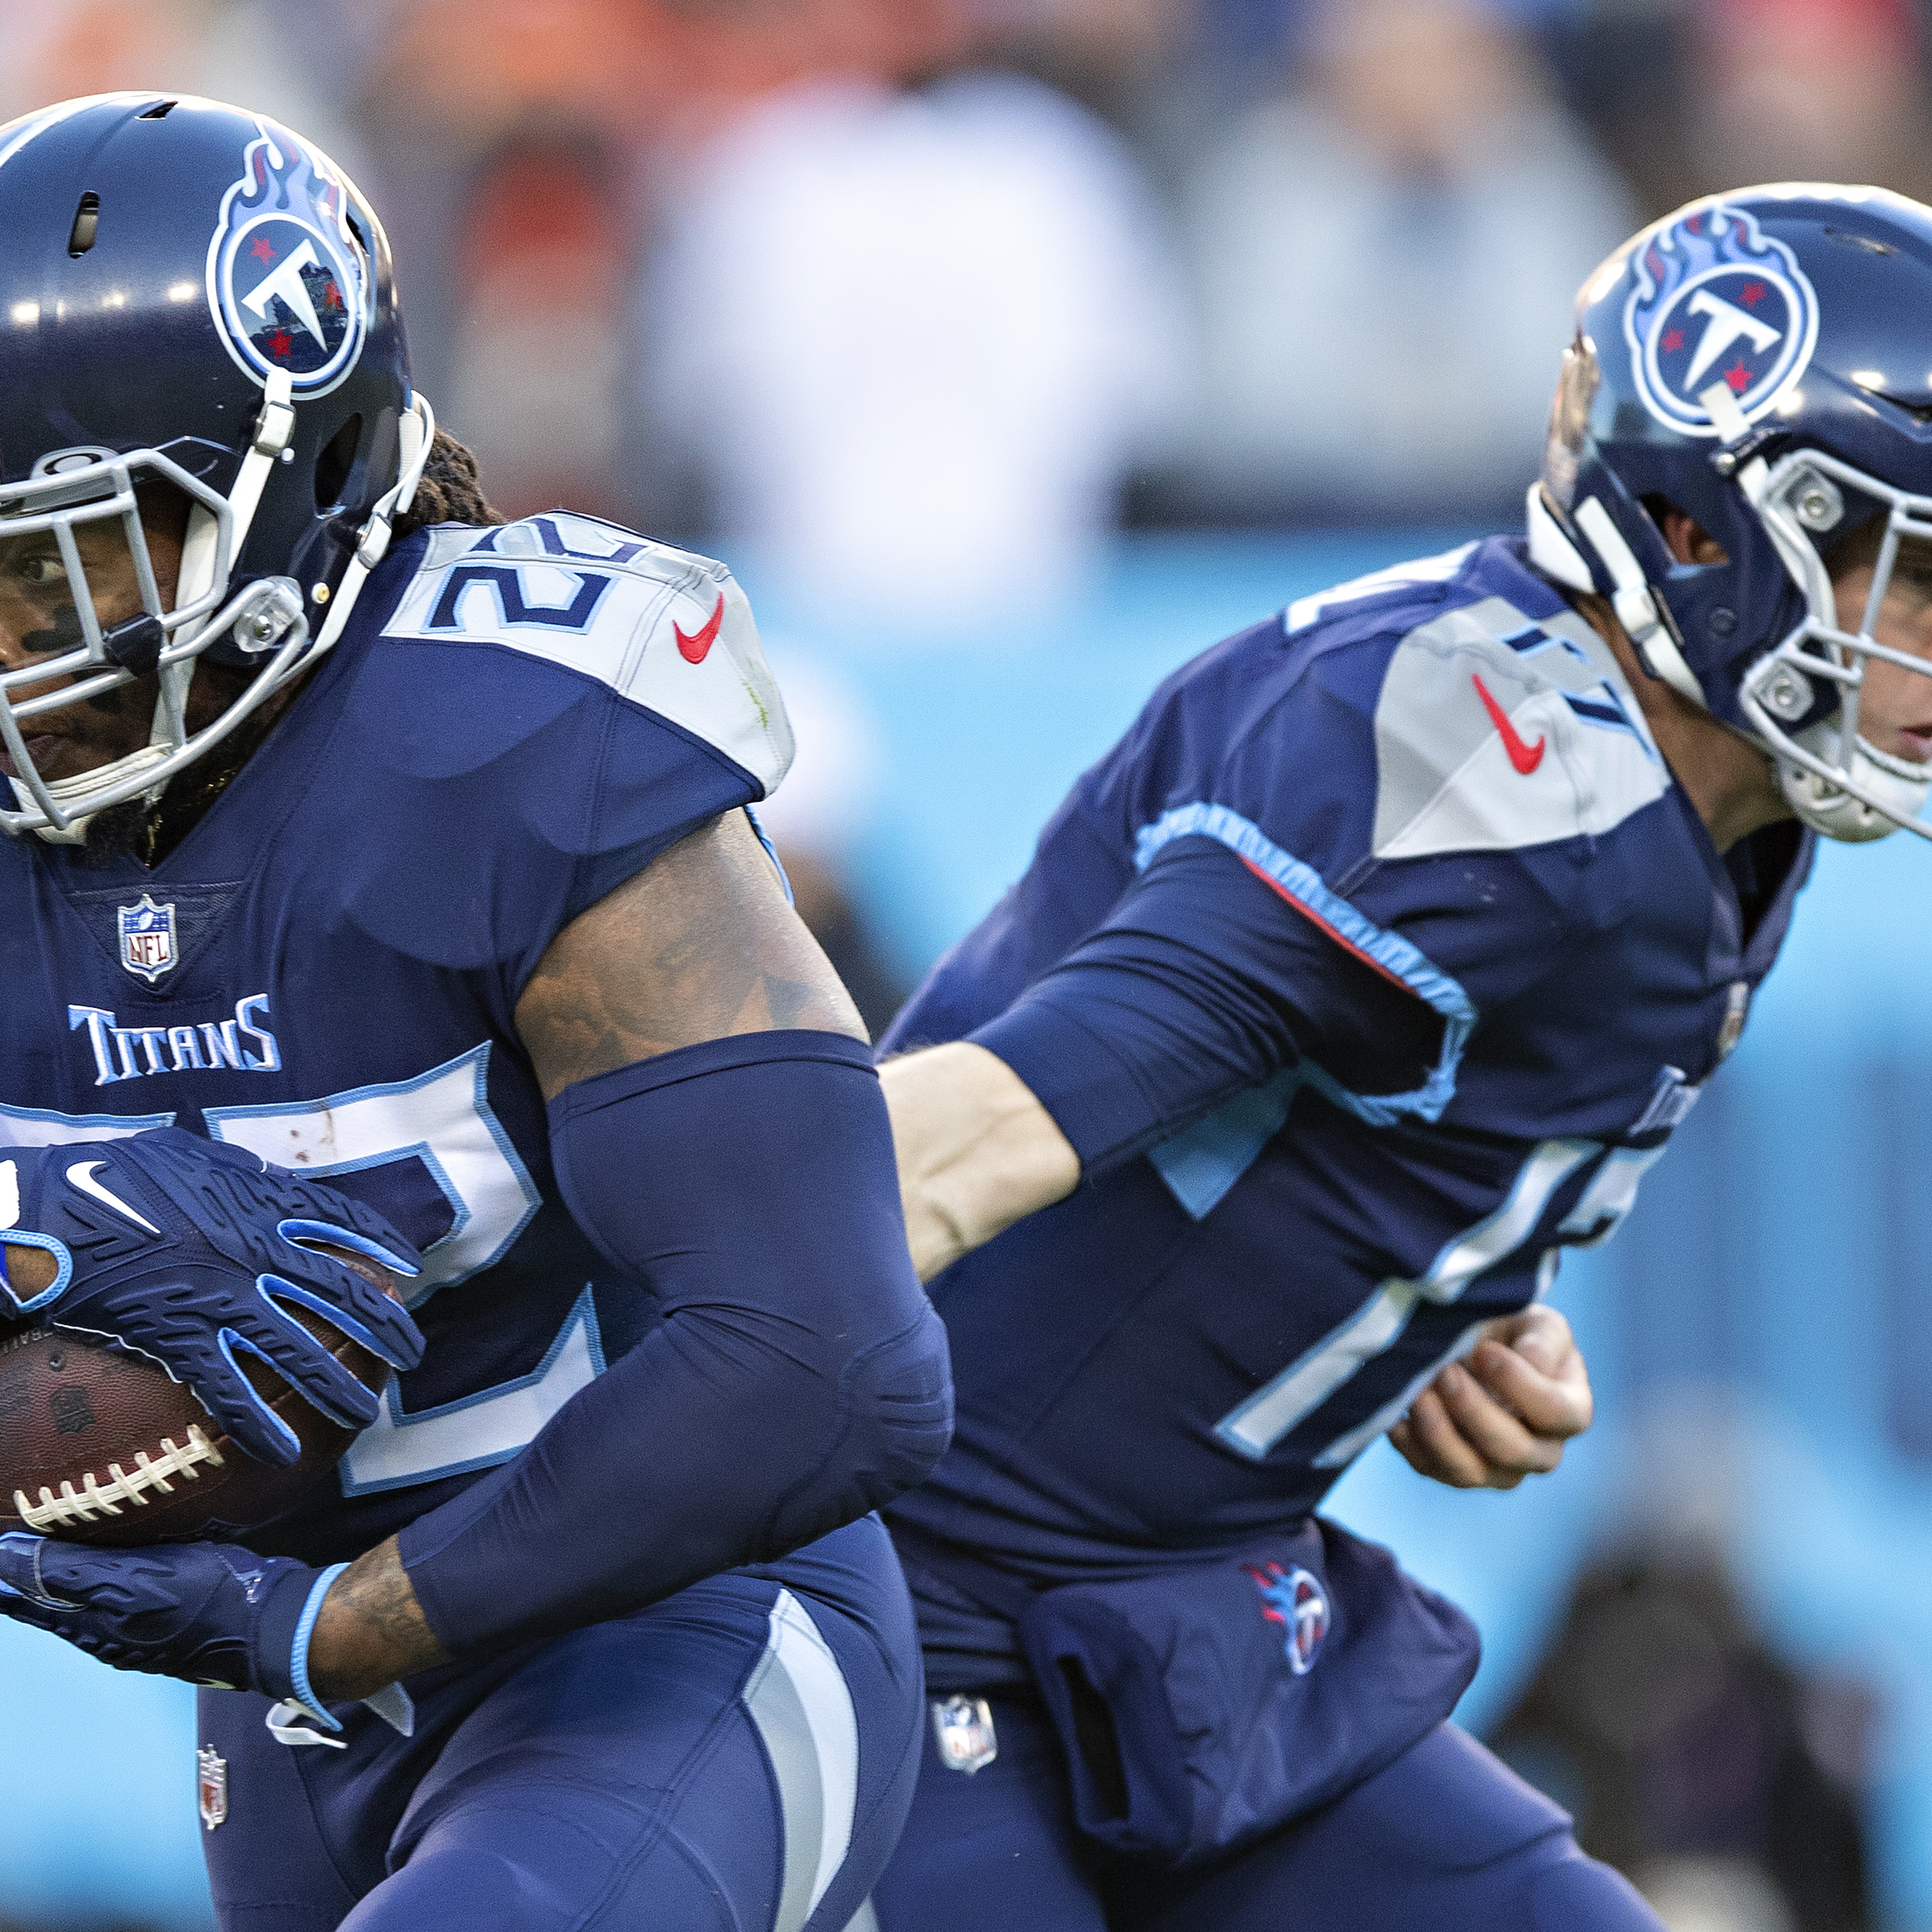 2022 Tennessee Titans Schedule: Full Listing of Dates, Times and TV Info